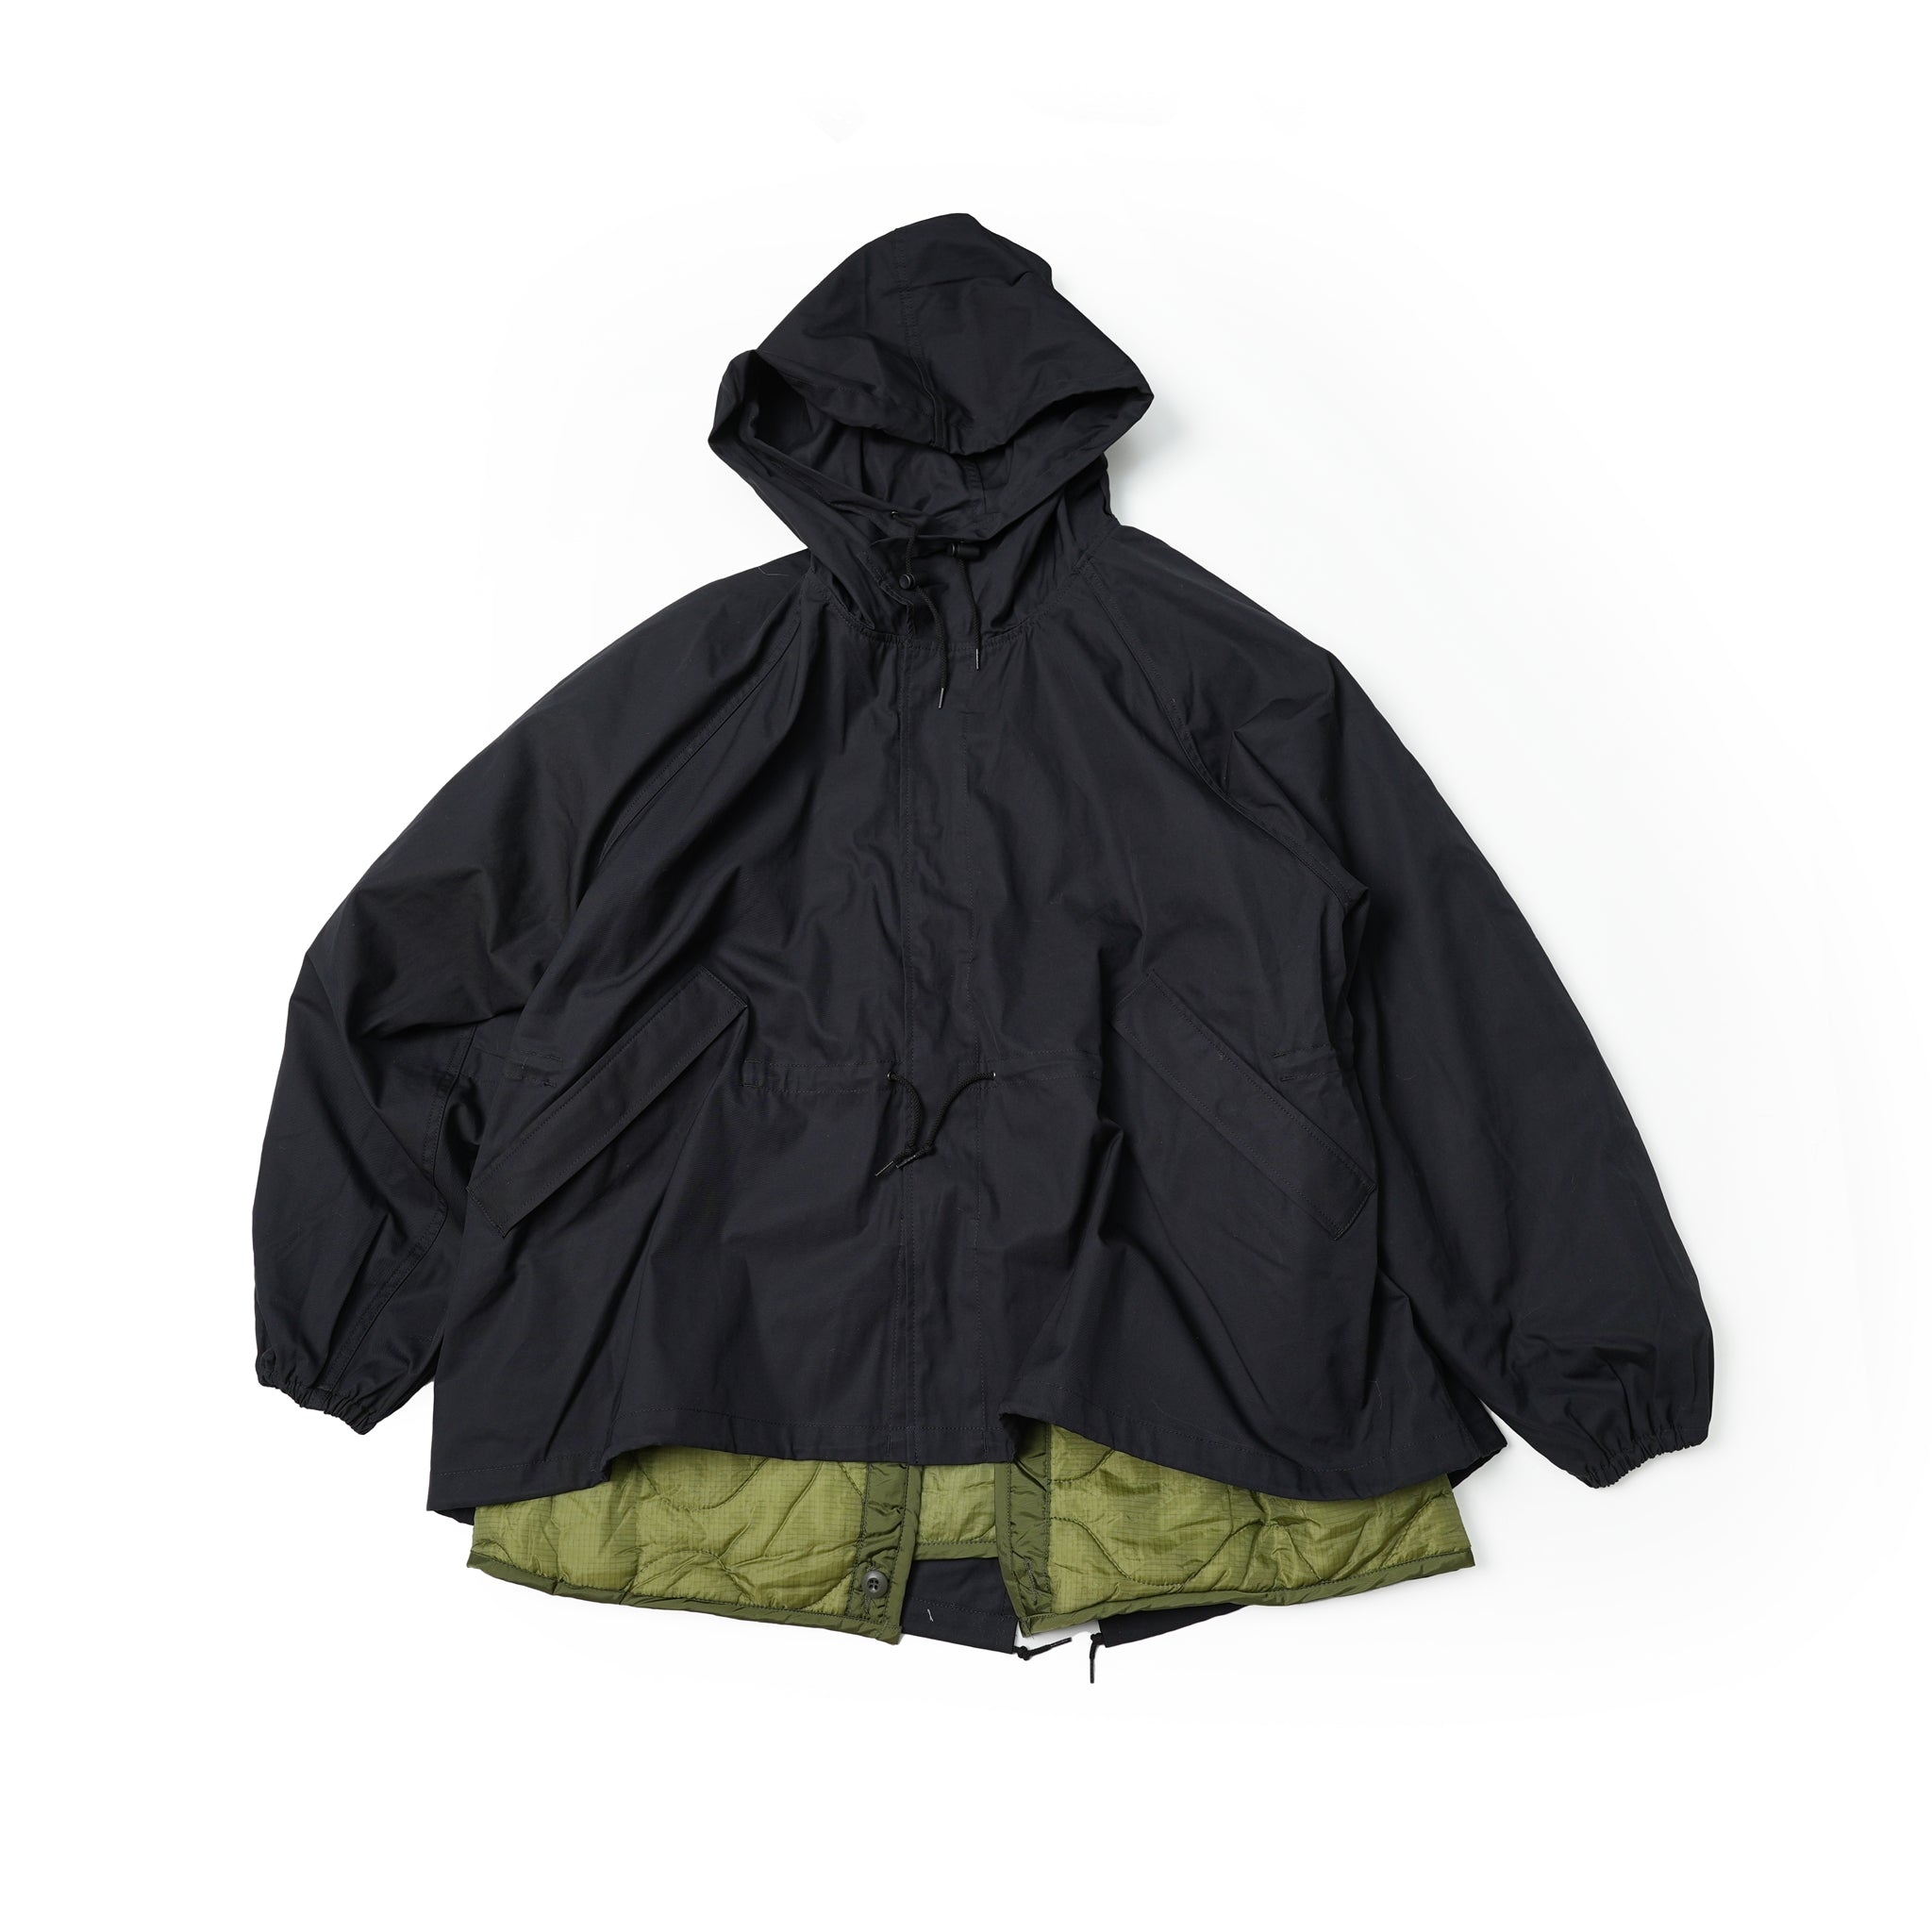 No:ms21f007 | Name:Ashland 90s Short Snow Parka with Dead 